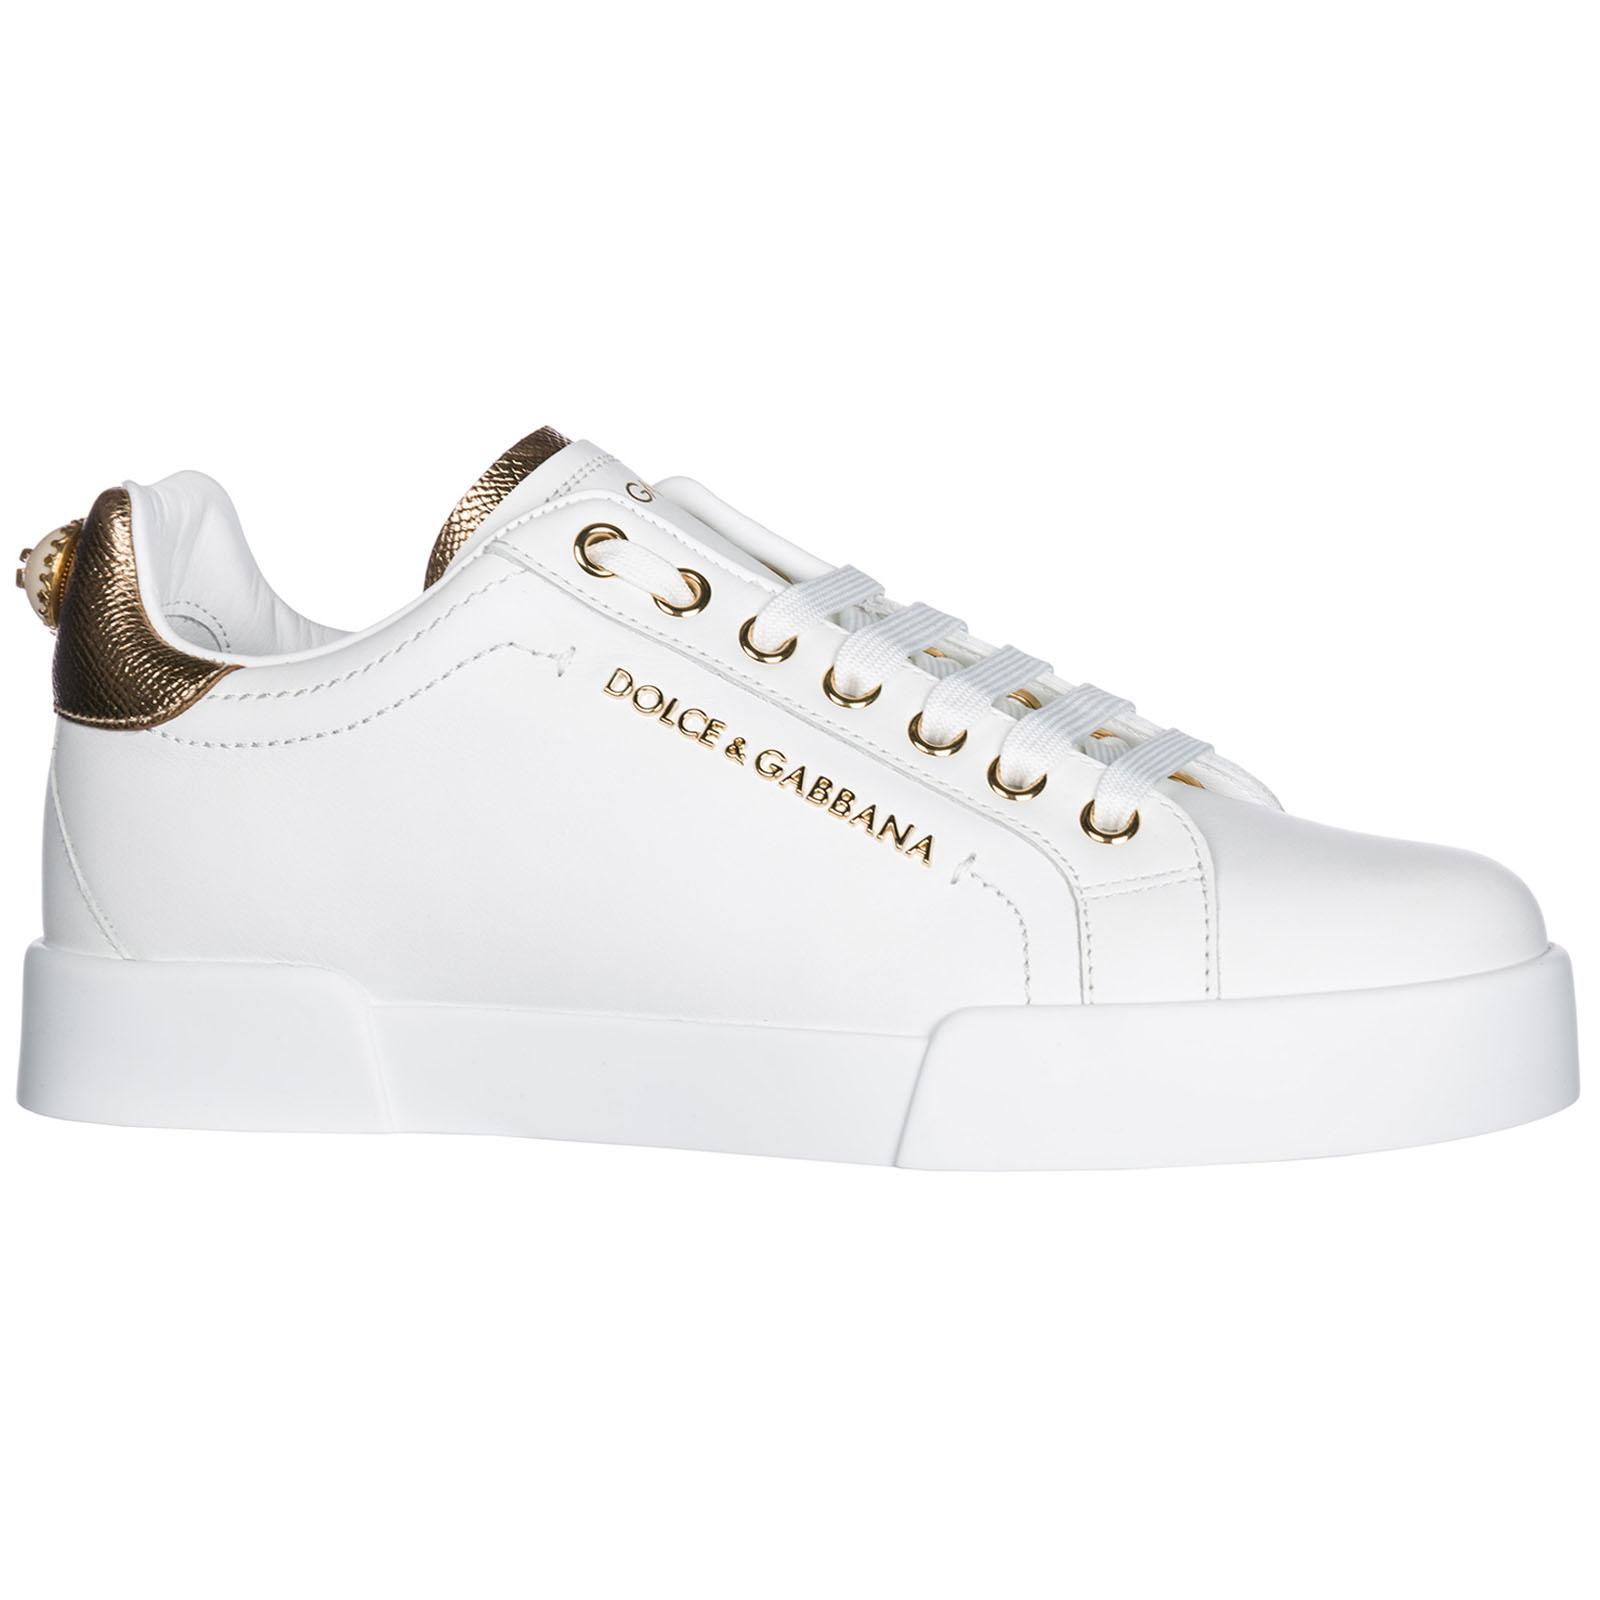 Dolce & Gabbana Women's Shoes Leather Trainers Sneakers Portofino in ...